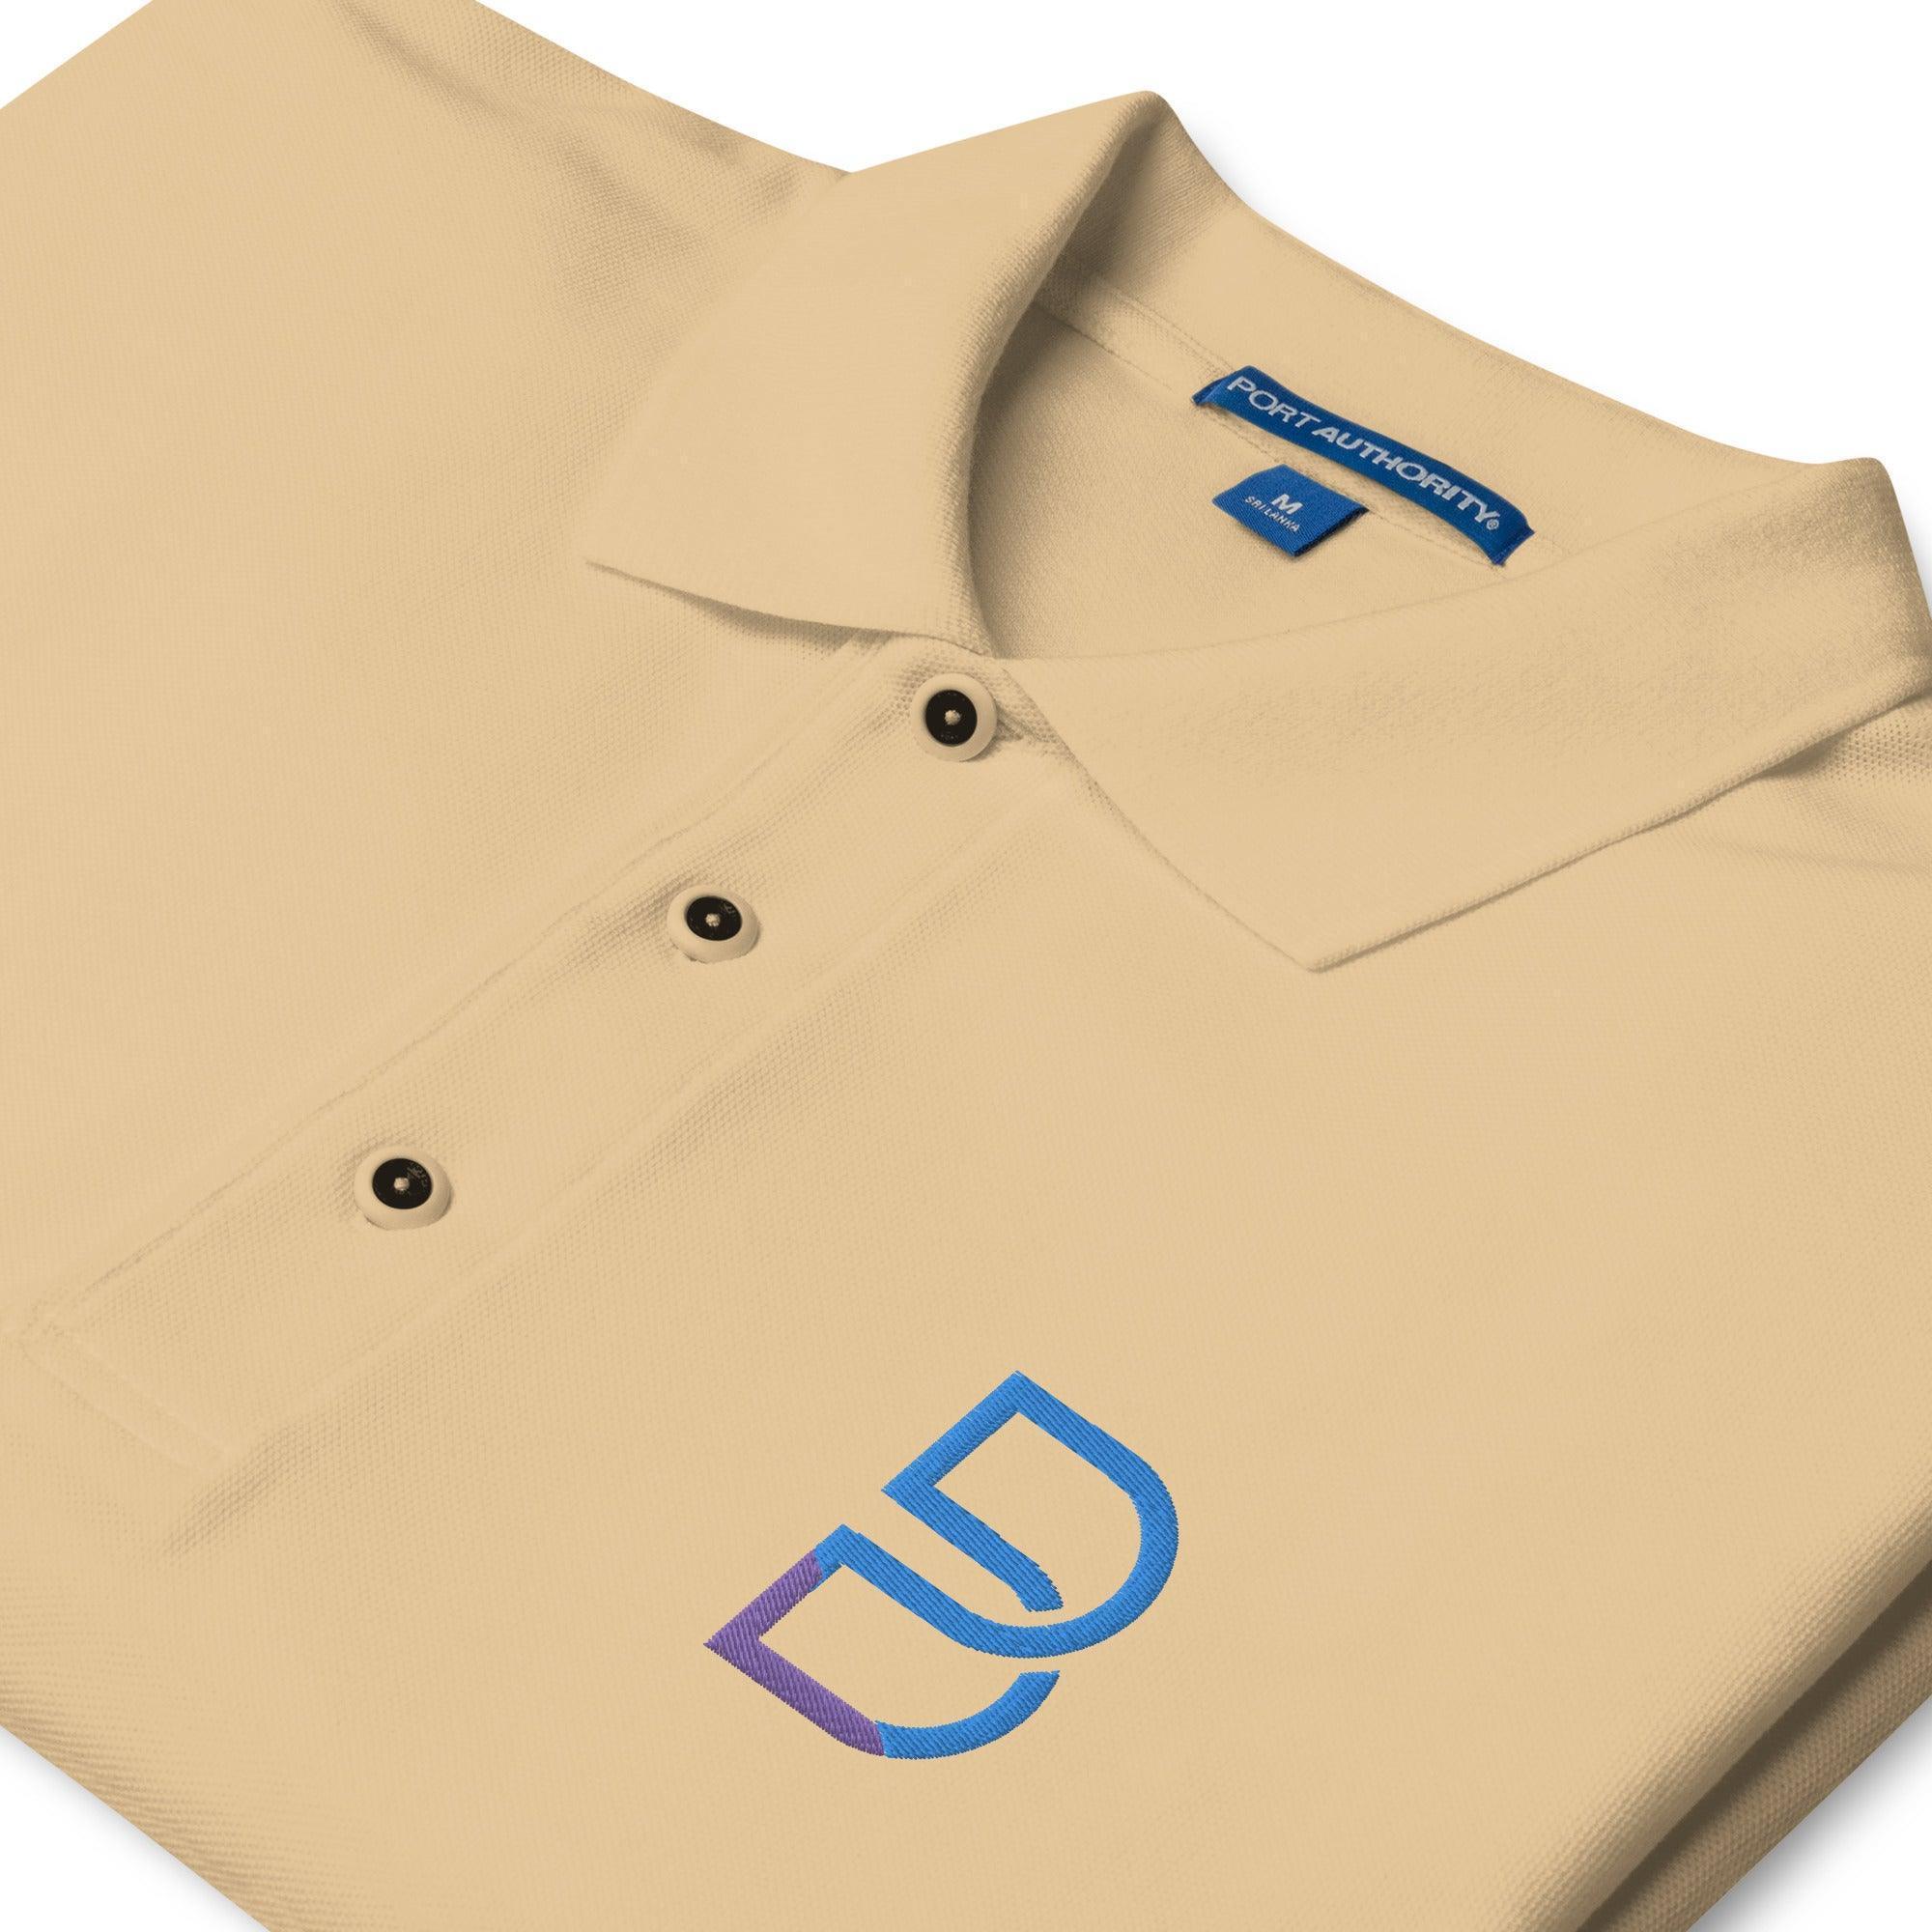 Bifrost Polo Shirt - InvestmenTees